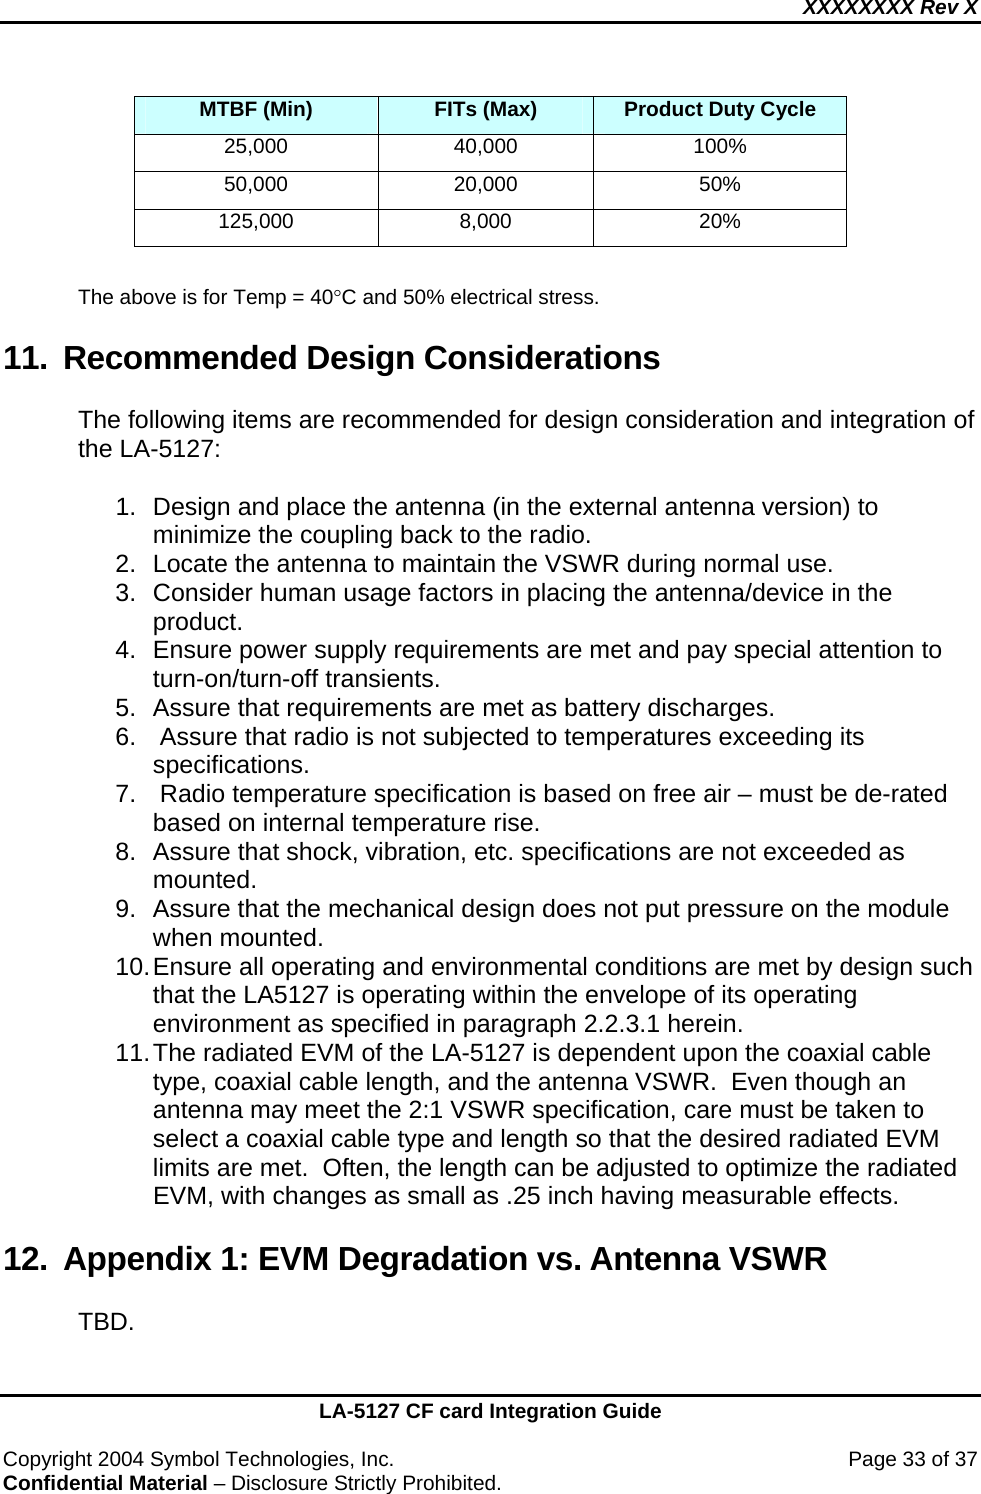 XXXXXXXX Rev X    LA-5127 CF card Integration Guide  Copyright 2004 Symbol Technologies, Inc.    Page 33 of 37 Confidential Material – Disclosure Strictly Prohibited. MTBF (Min)  FITs (Max)  Product Duty Cycle 25,000 40,000  100% 50,000 20,000  50% 125,000 8,000  20%  The above is for Temp = 40°C and 50% electrical stress. 11. Recommended Design Considerations The following items are recommended for design consideration and integration of the LA-5127:  1.  Design and place the antenna (in the external antenna version) to minimize the coupling back to the radio. 2.  Locate the antenna to maintain the VSWR during normal use. 3.  Consider human usage factors in placing the antenna/device in the product. 4.  Ensure power supply requirements are met and pay special attention to turn-on/turn-off transients. 5. Assure that requirements are met as battery discharges. 6.   Assure that radio is not subjected to temperatures exceeding its specifications. 7.   Radio temperature specification is based on free air – must be de-rated based on internal temperature rise. 8.  Assure that shock, vibration, etc. specifications are not exceeded as mounted. 9.  Assure that the mechanical design does not put pressure on the module when mounted. 10. Ensure all operating and environmental conditions are met by design such that the LA5127 is operating within the envelope of its operating environment as specified in paragraph 2.2.3.1 herein. 11. The radiated EVM of the LA-5127 is dependent upon the coaxial cable type, coaxial cable length, and the antenna VSWR.  Even though an antenna may meet the 2:1 VSWR specification, care must be taken to select a coaxial cable type and length so that the desired radiated EVM limits are met.  Often, the length can be adjusted to optimize the radiated EVM, with changes as small as .25 inch having measurable effects. 12.  Appendix 1: EVM Degradation vs. Antenna VSWR TBD. 